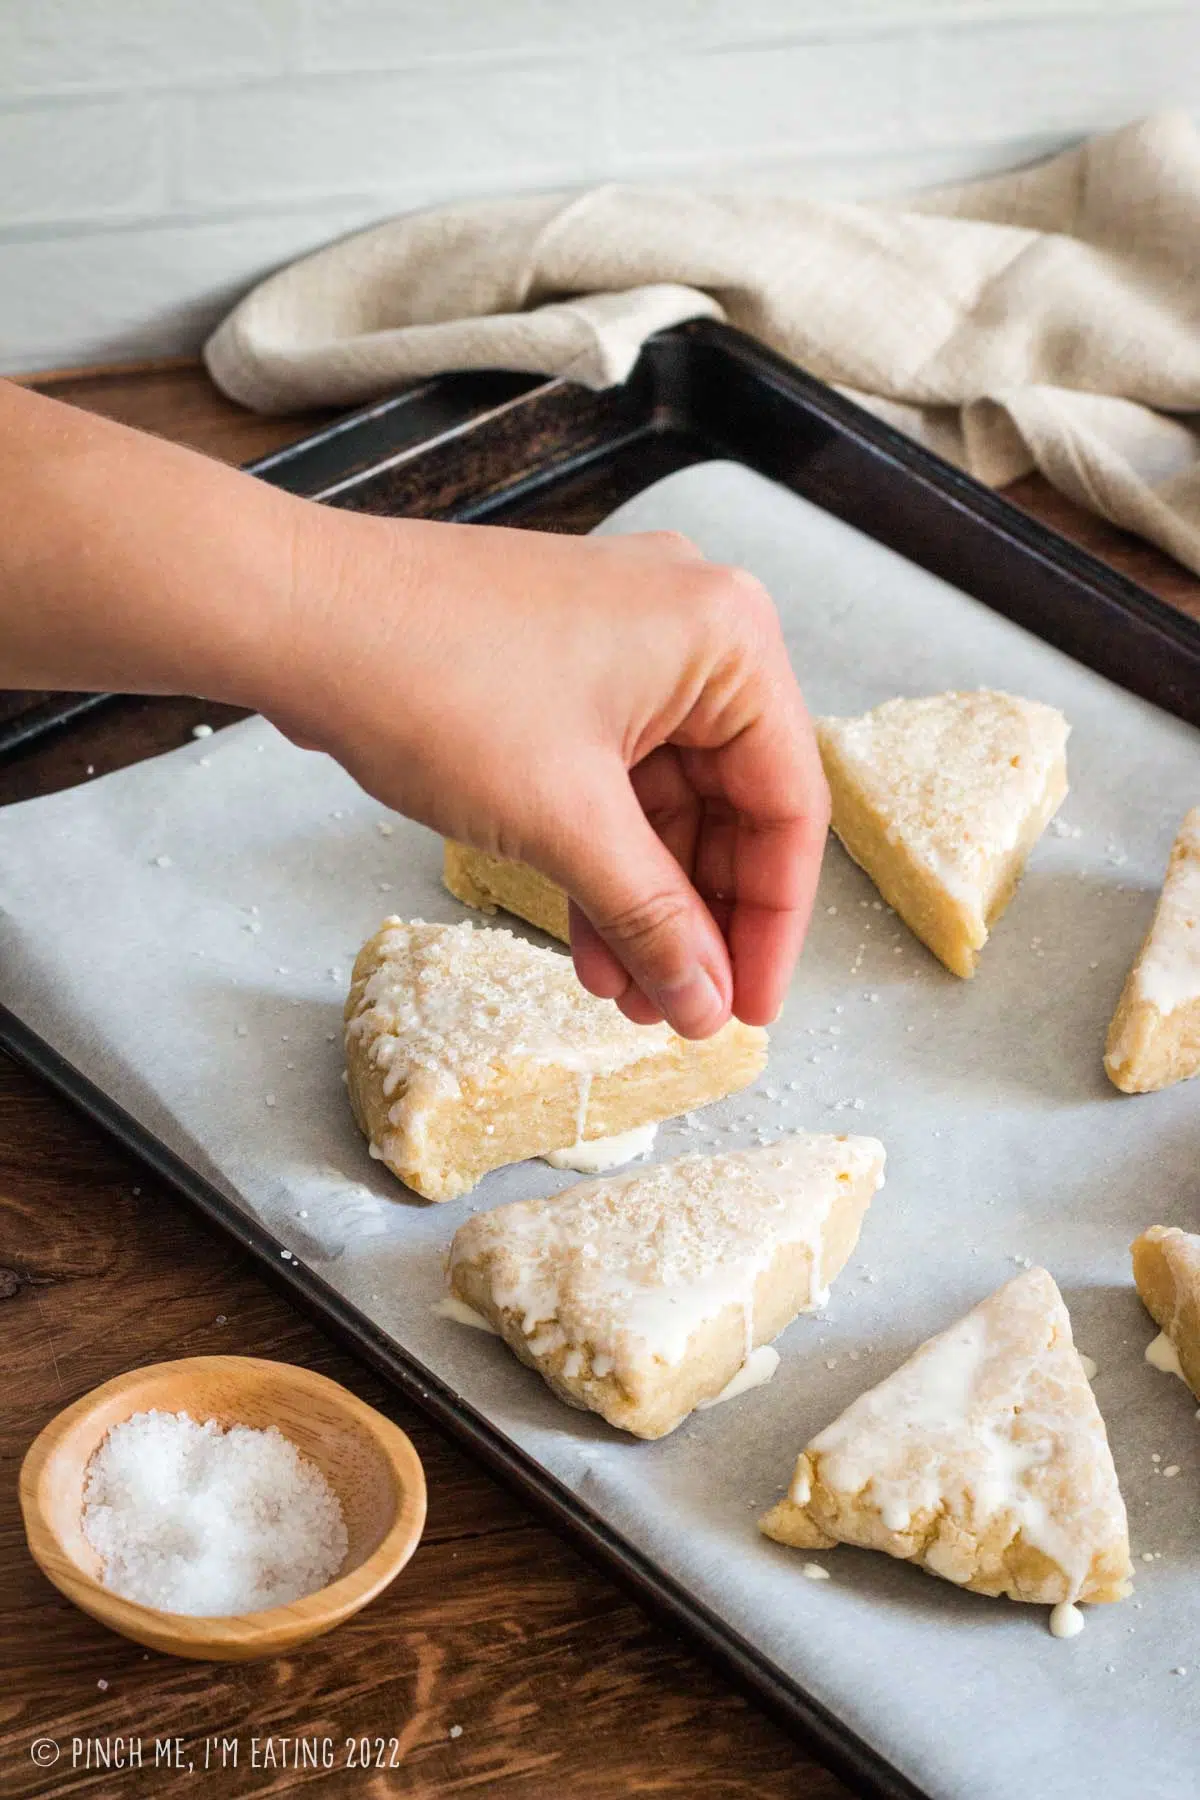 A hand sprinkling coarse sanding sugar onto plain scones brushed with heavy cream on a parchment-paper-lined baking sheet.